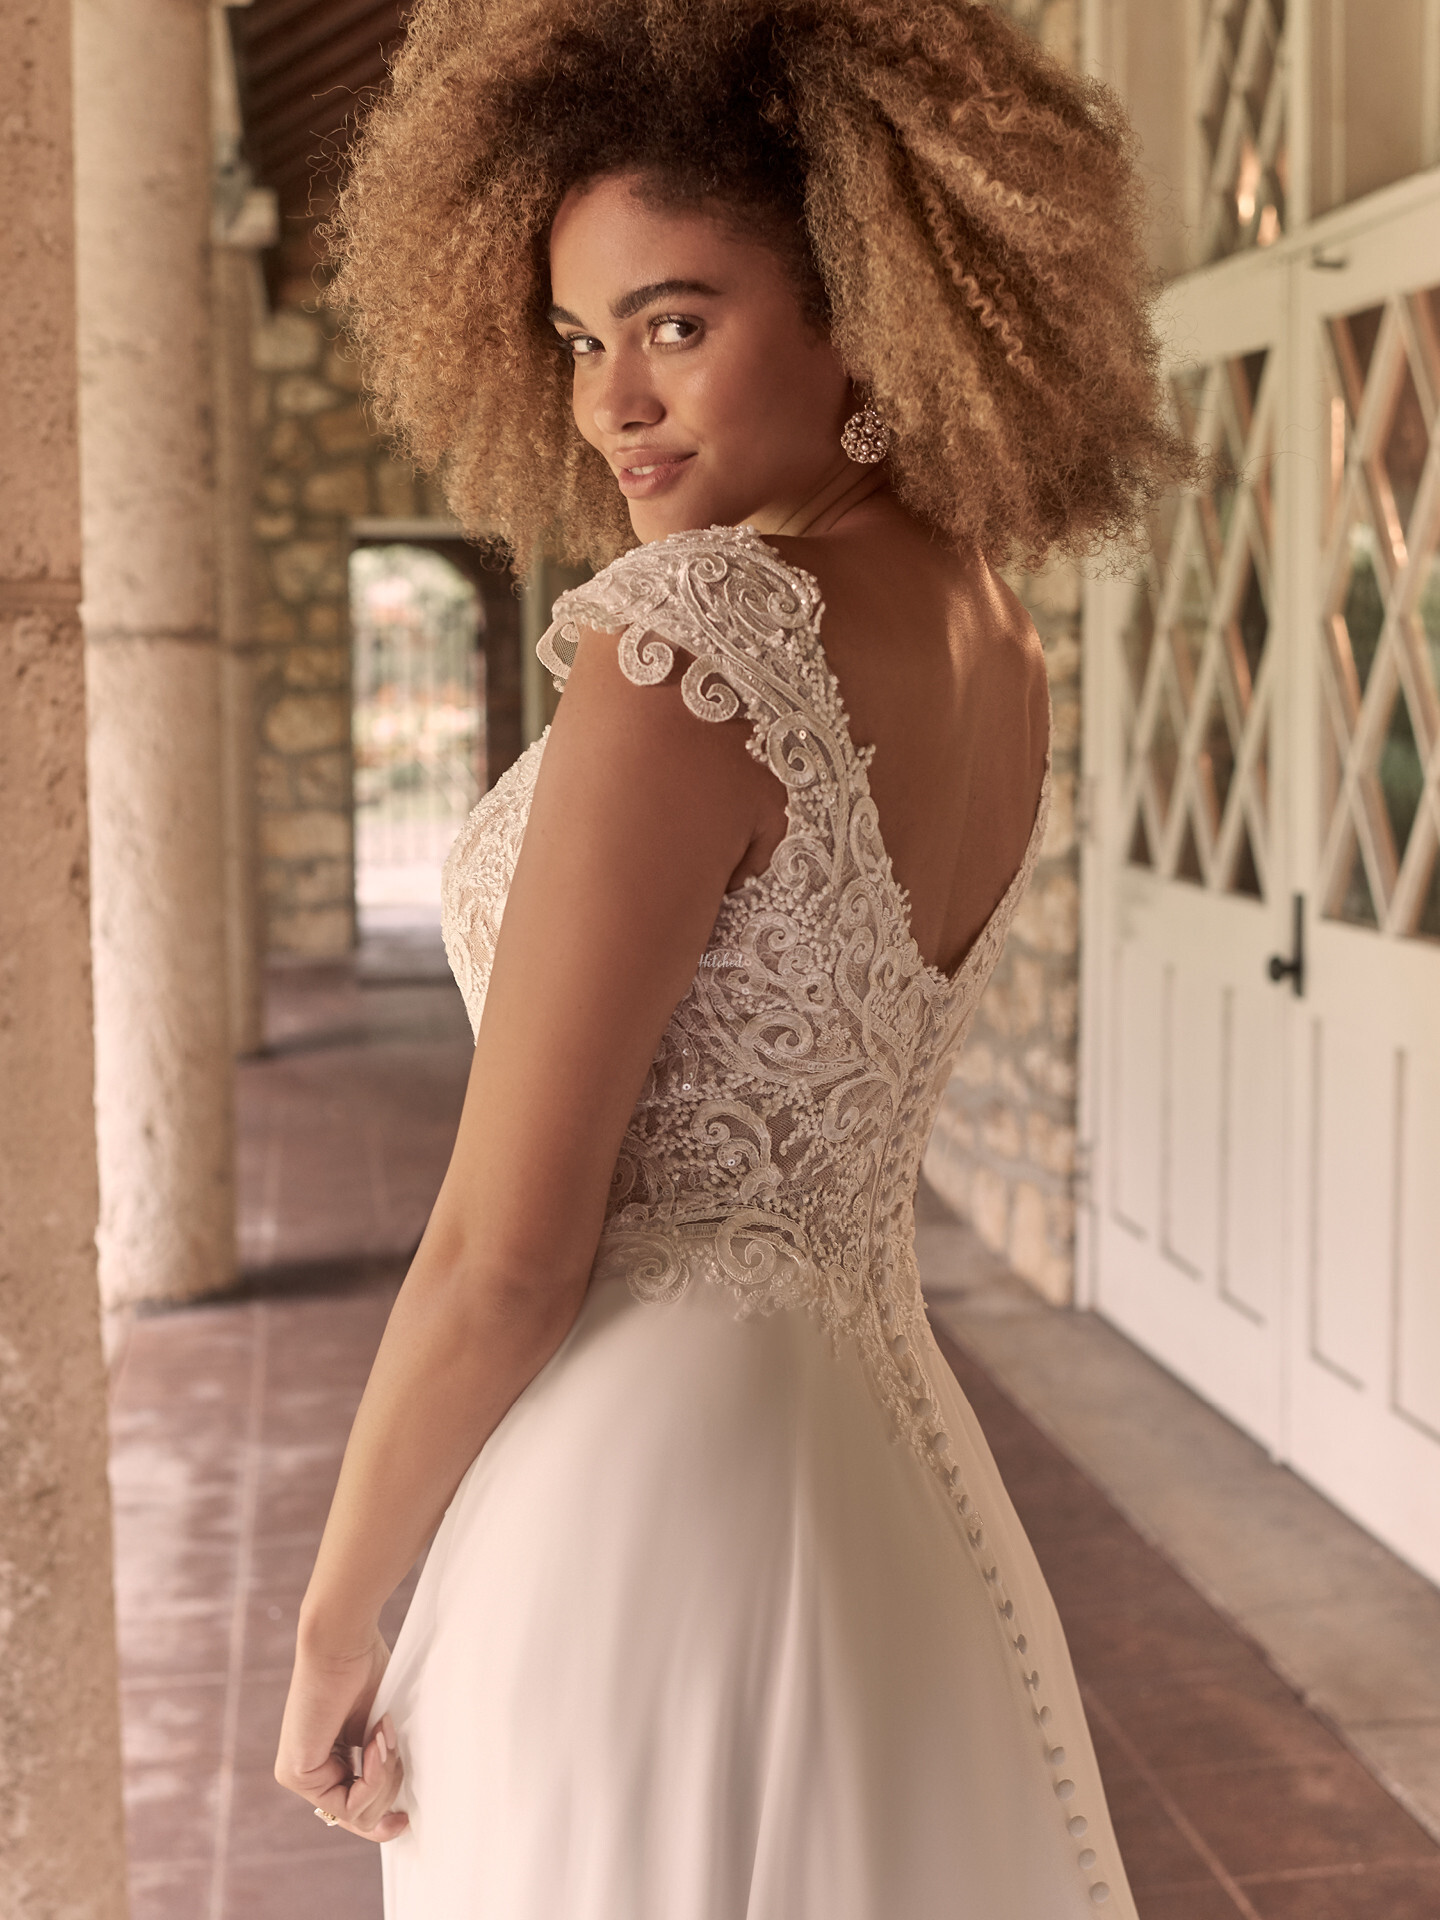 JUNE Wedding Dress from Maggie Sottero - hitched.co.uk